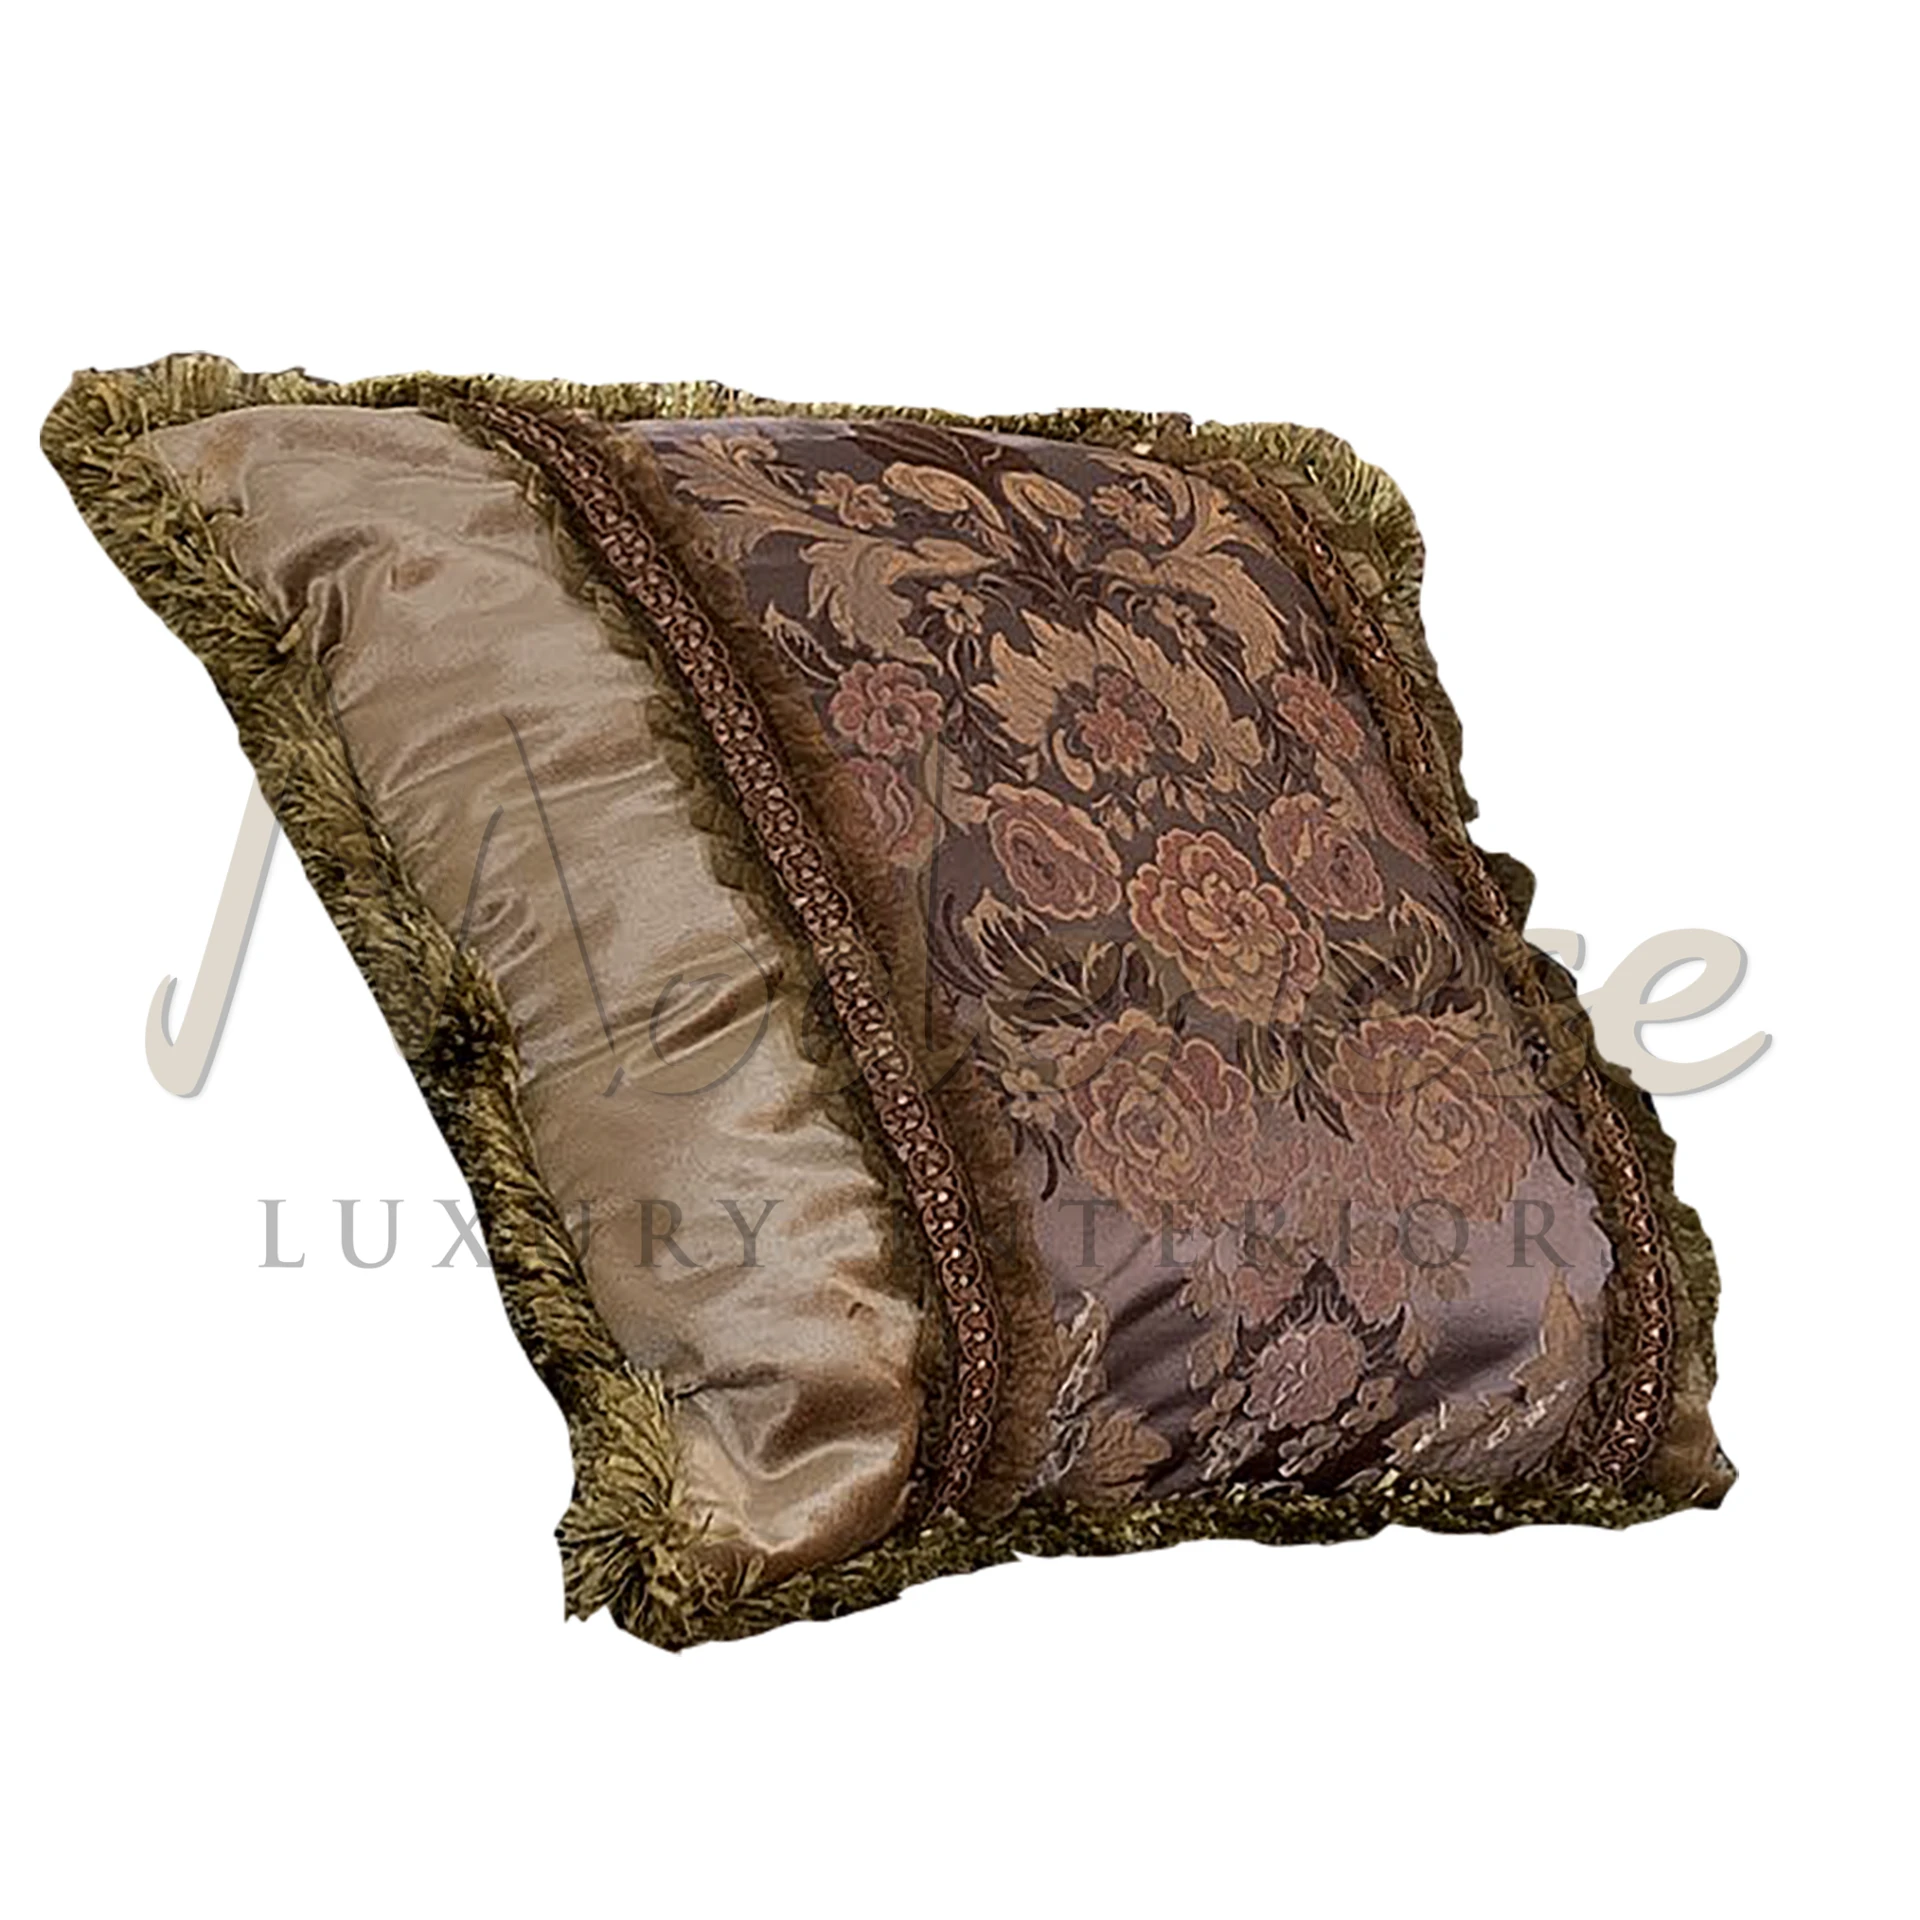 Opulent Baroque Style Brown Pillow with rich colors and intricate detailing, embodying luxury Italian craftsmanship.